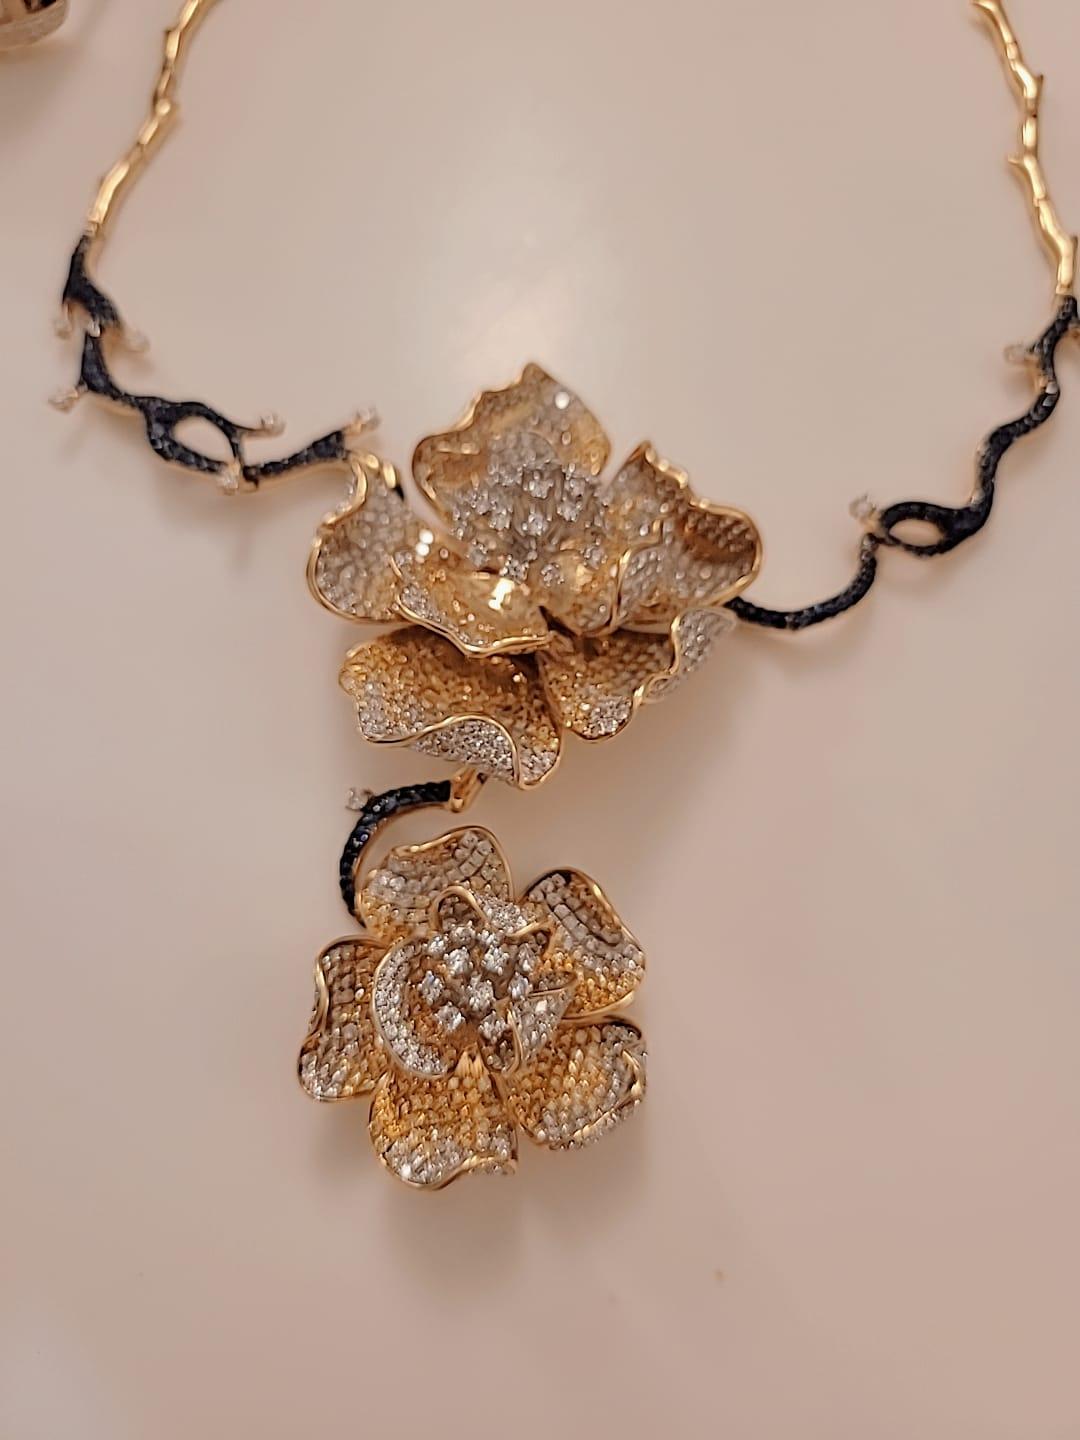 Amazing masterpiece just finished making.

Flower Necklace 
18K GOLD - 95.50 GM 
562 YELLOW DIAMONDS - 8.63 CT
818 DIAMONDS (VS)  - 13.64 CT
283 BLUE SAPPHIRES - 3.670 CT